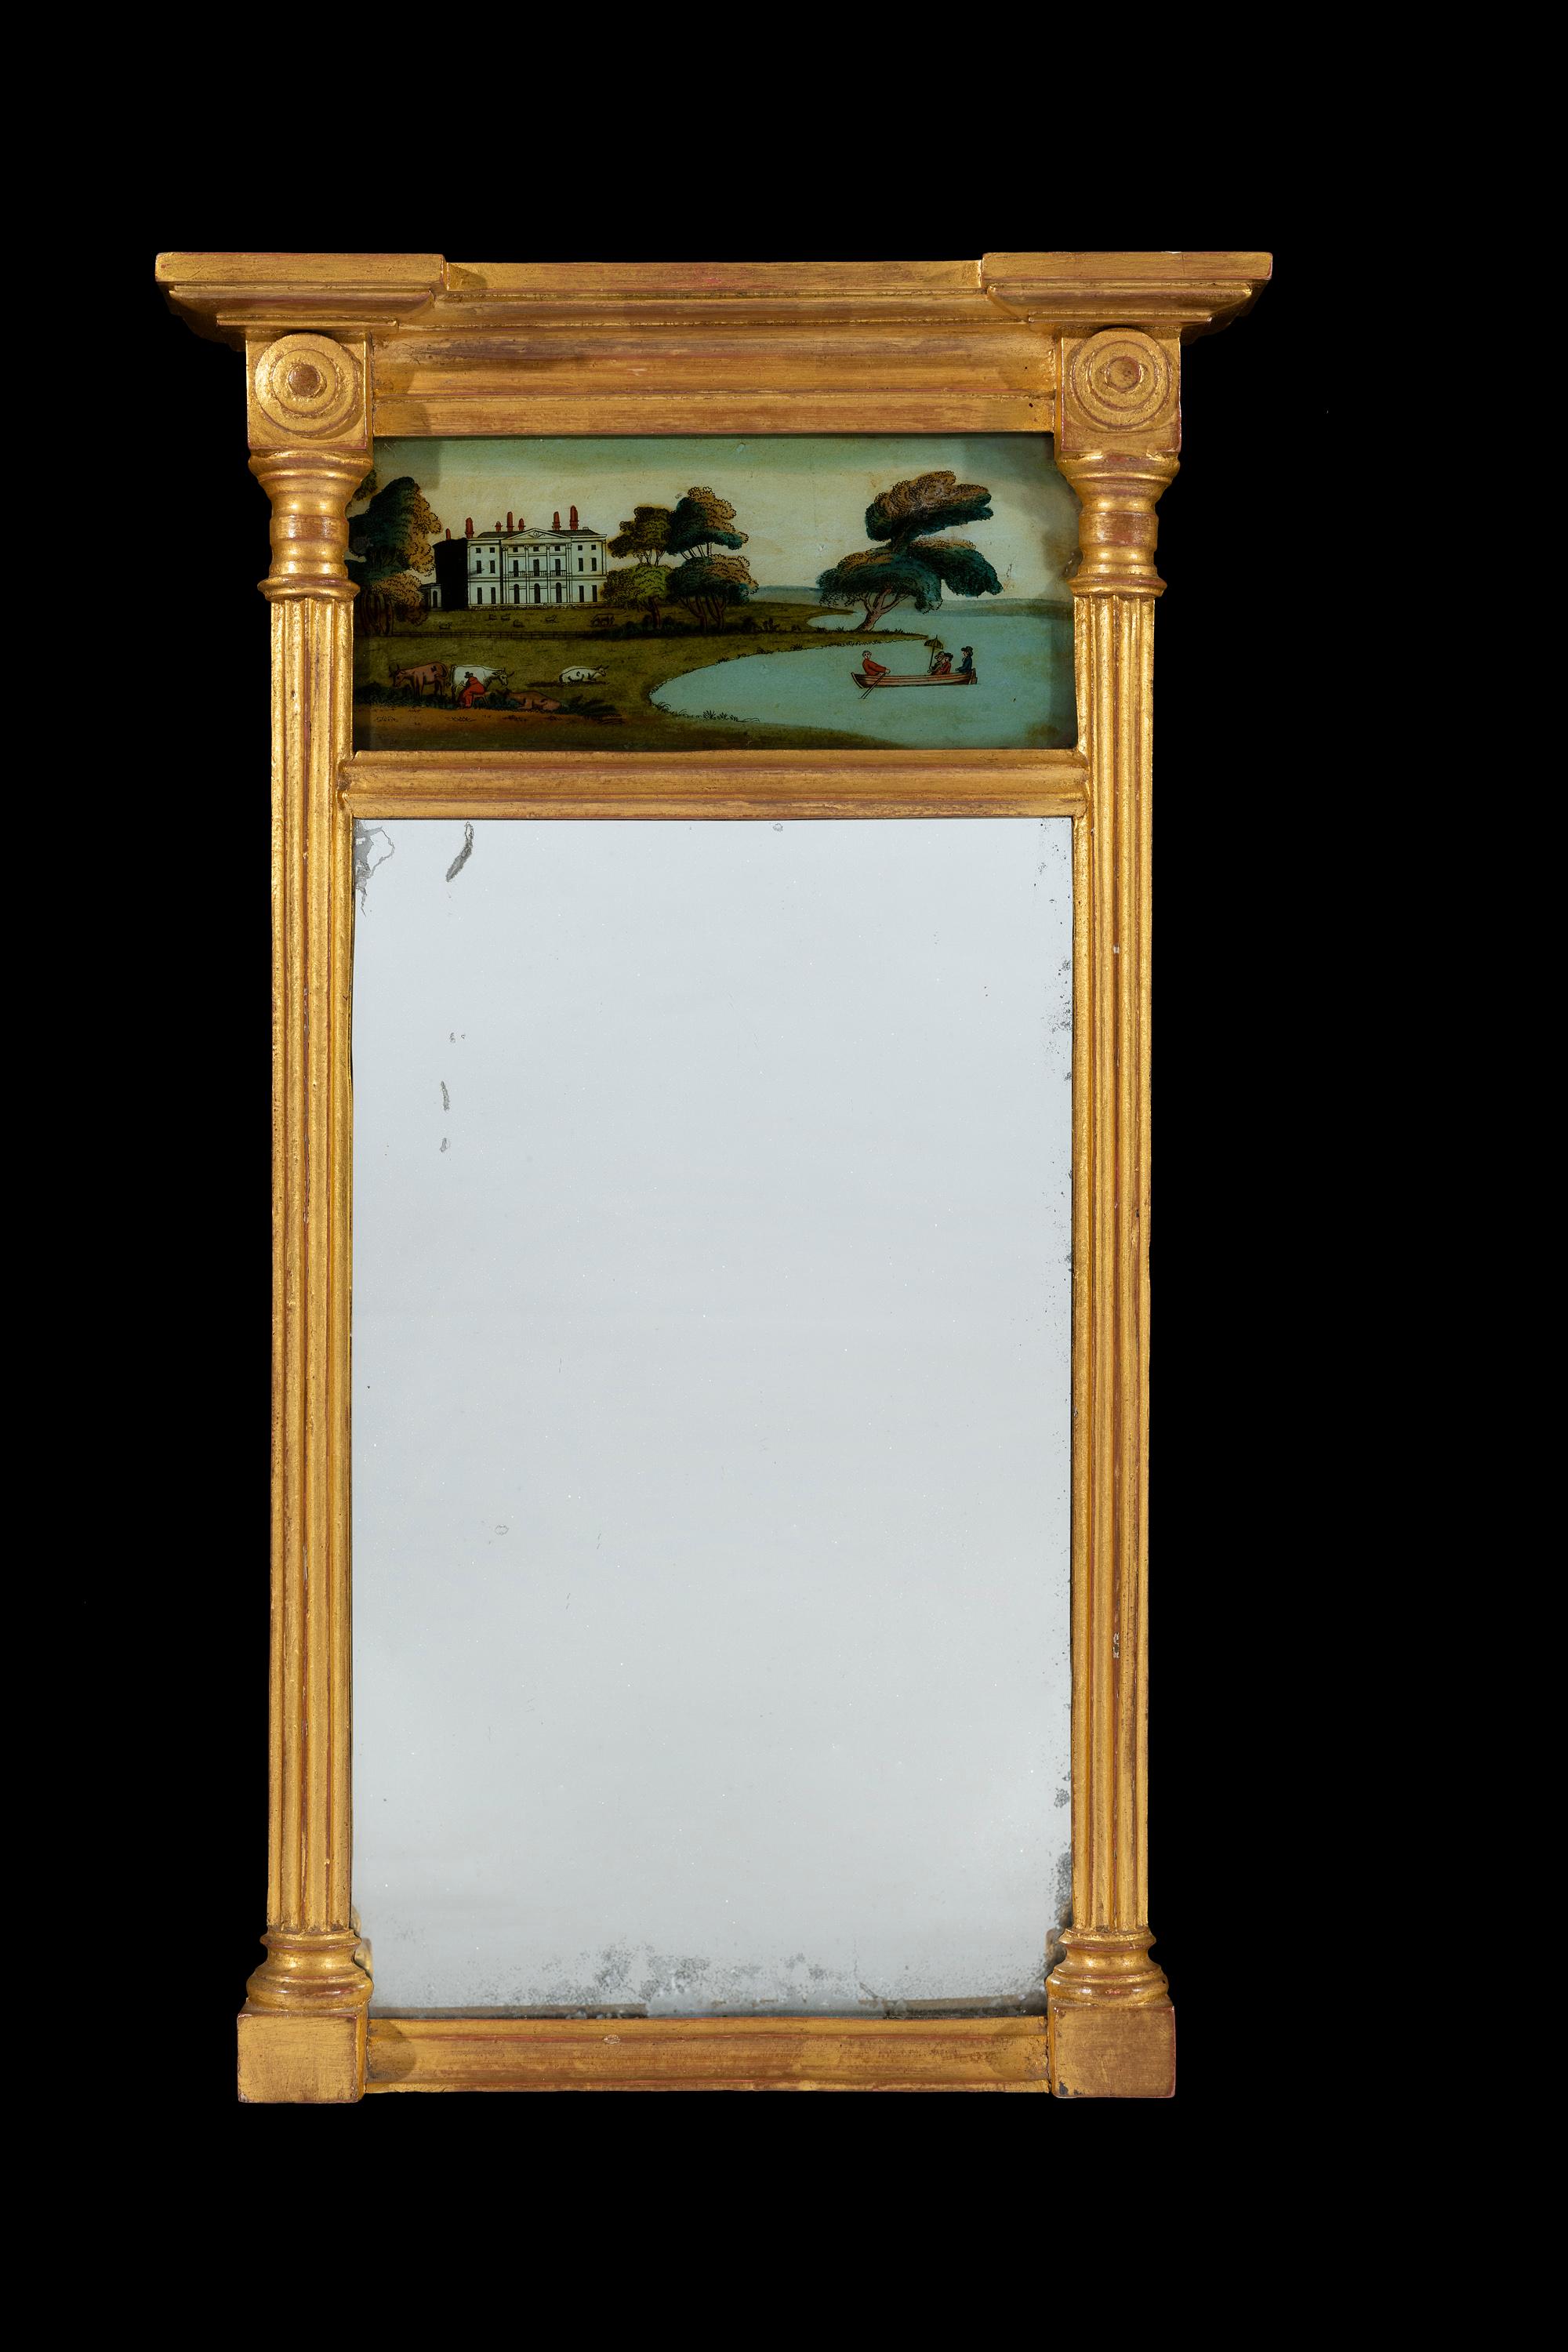 The diminutive giltwood mirror has an eglomisé plate depicting figures on a lake by a large Georgian house. The reeded columns flank the original plate glass mirror.